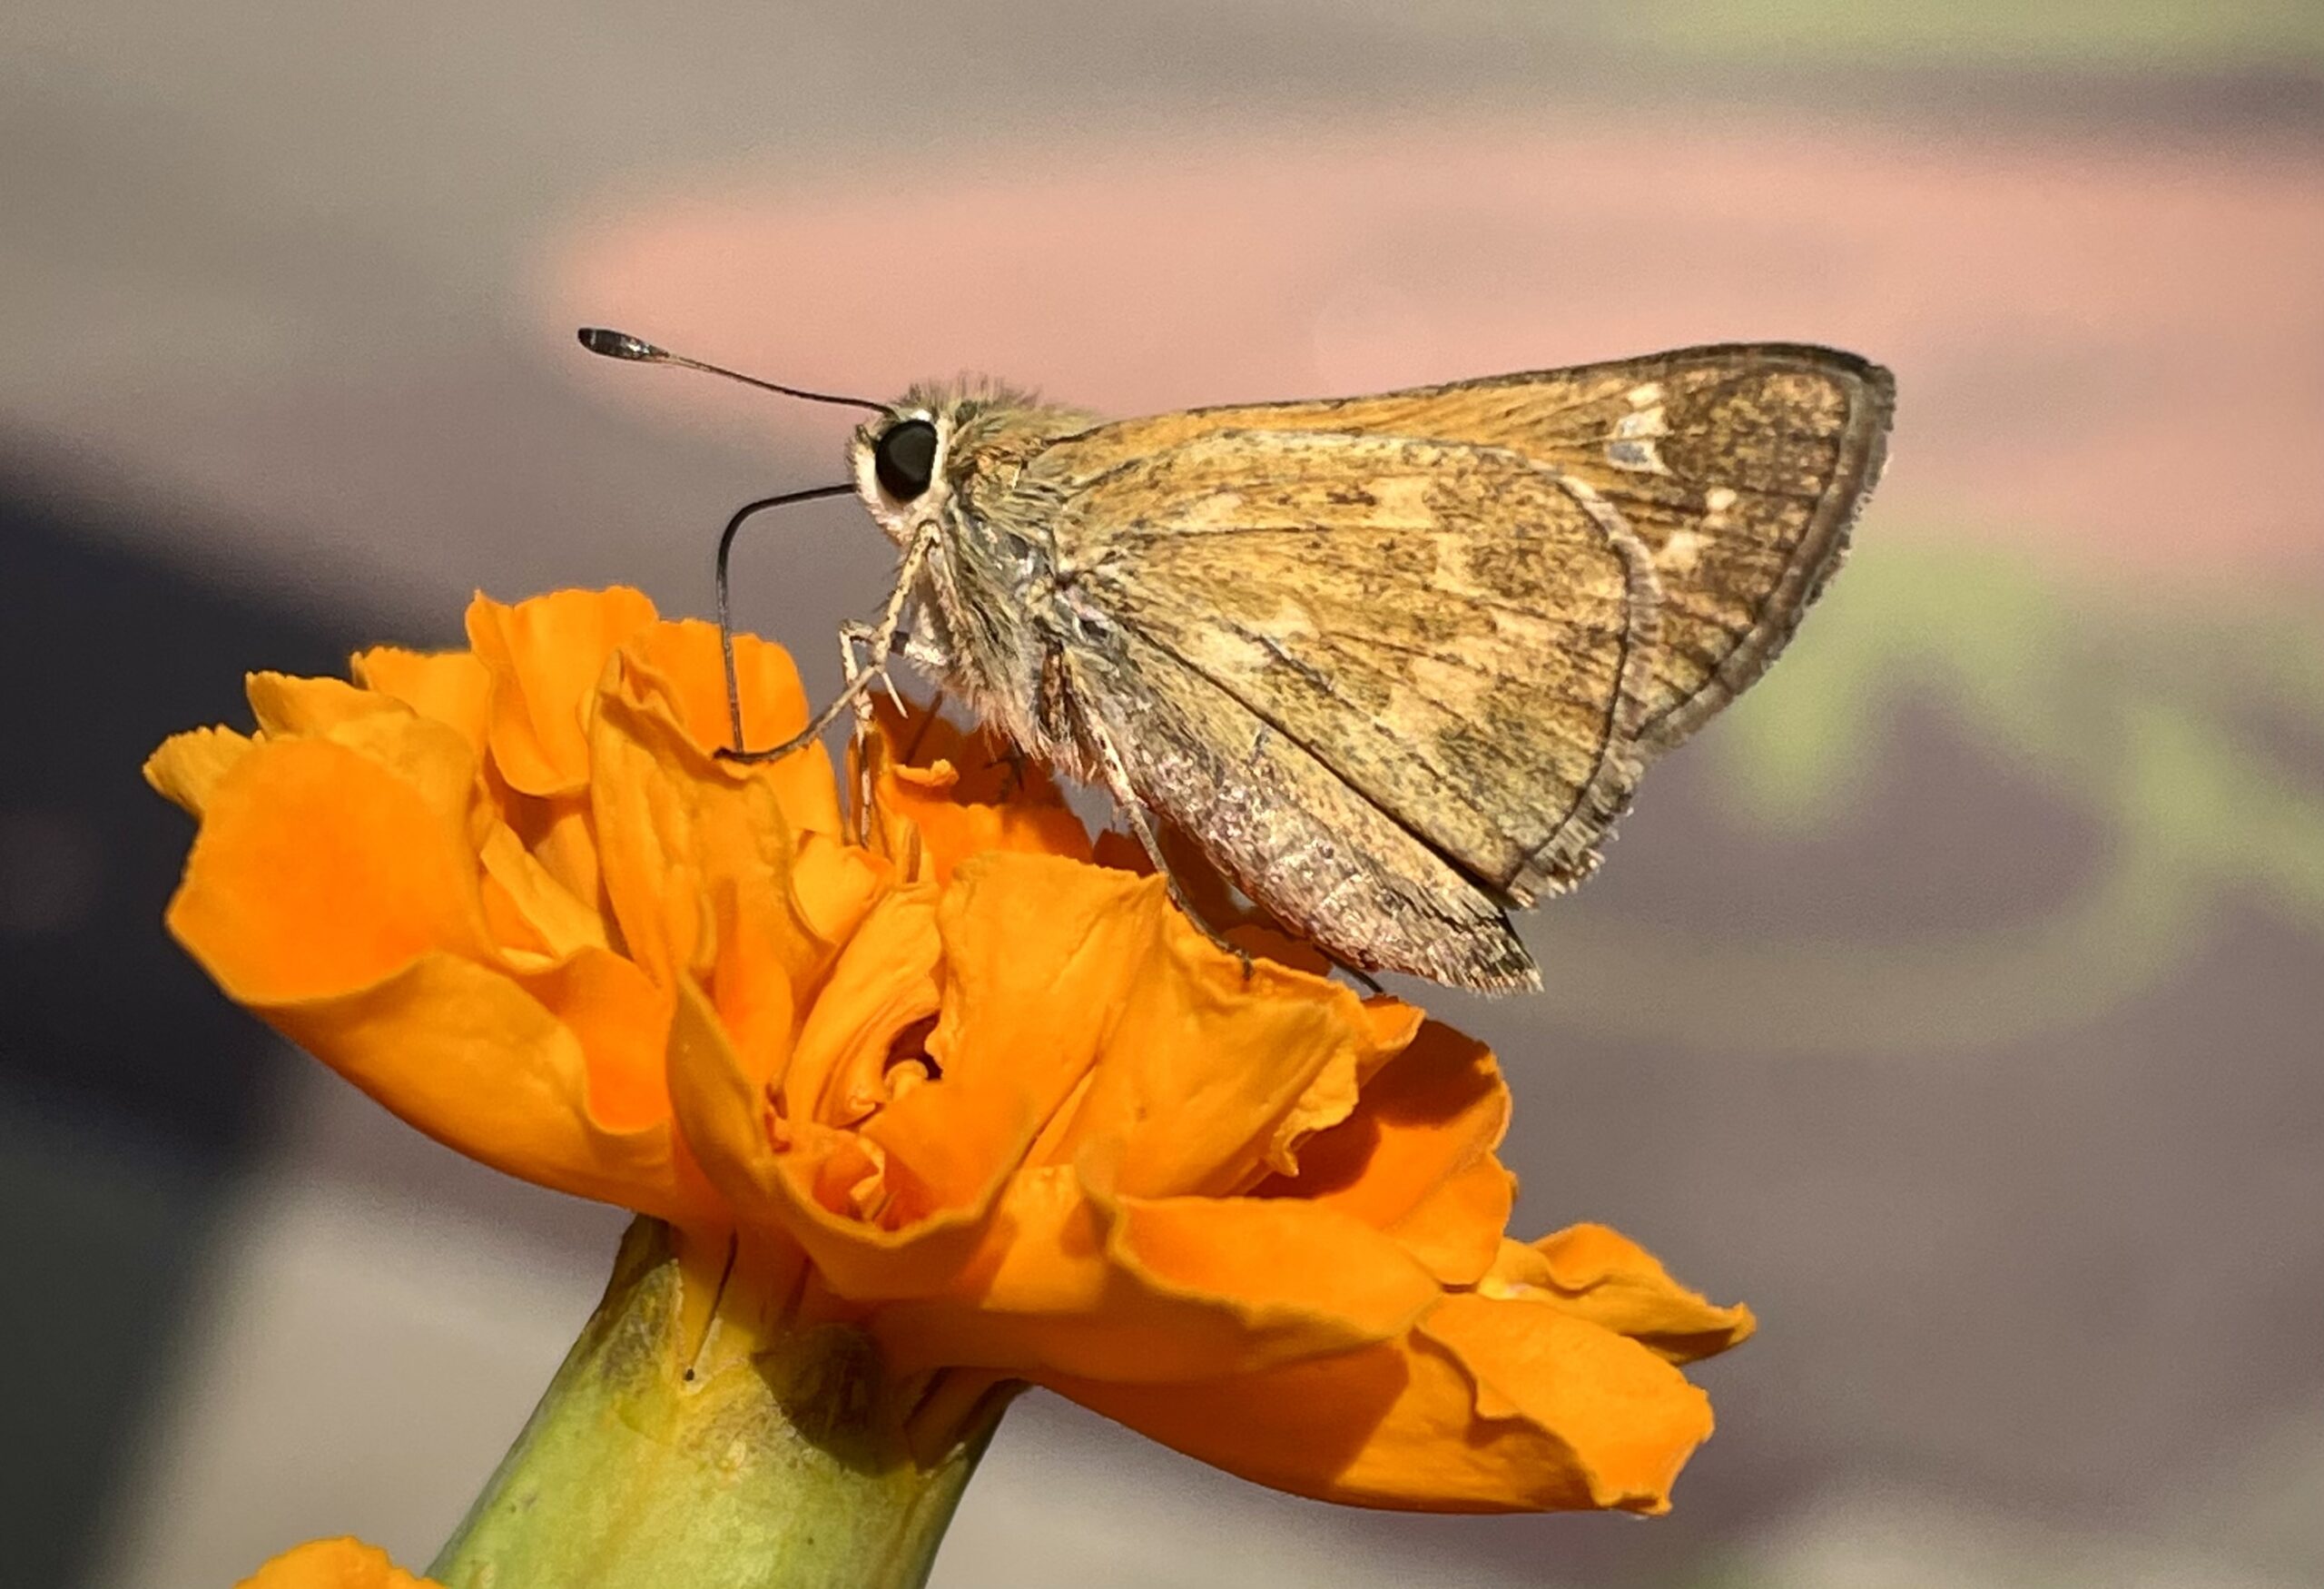 native butterflies: this skipper butterfly is feeding from a marigold flower!